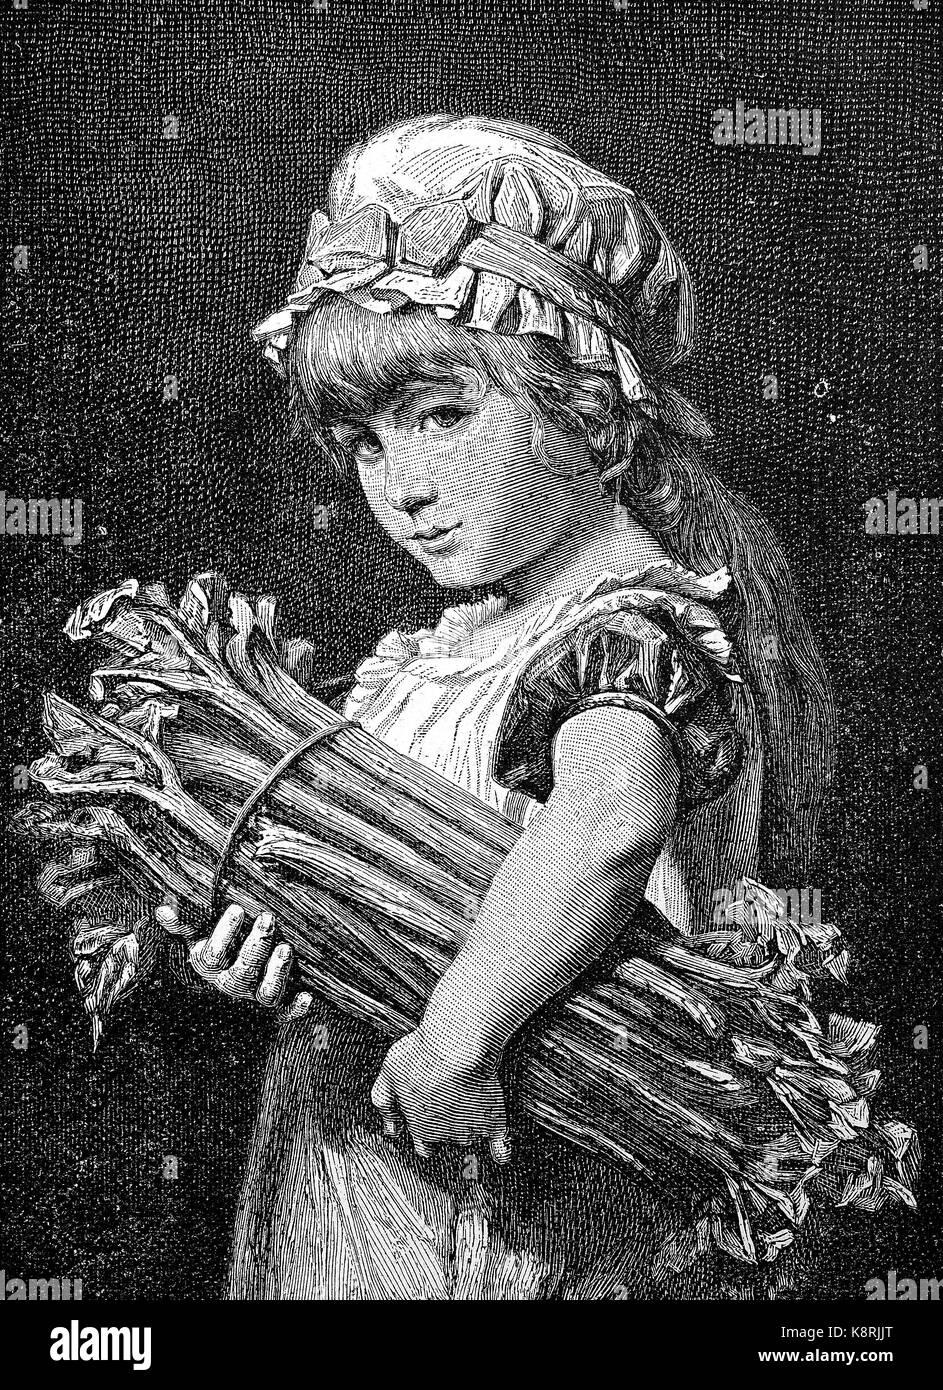 Girl with a bunch of rhubarb sticks, Mädchen mit einem Bündel Rhabarberstangen, digital improved reproduction of a woodcut, published in the 19th century Stock Photo